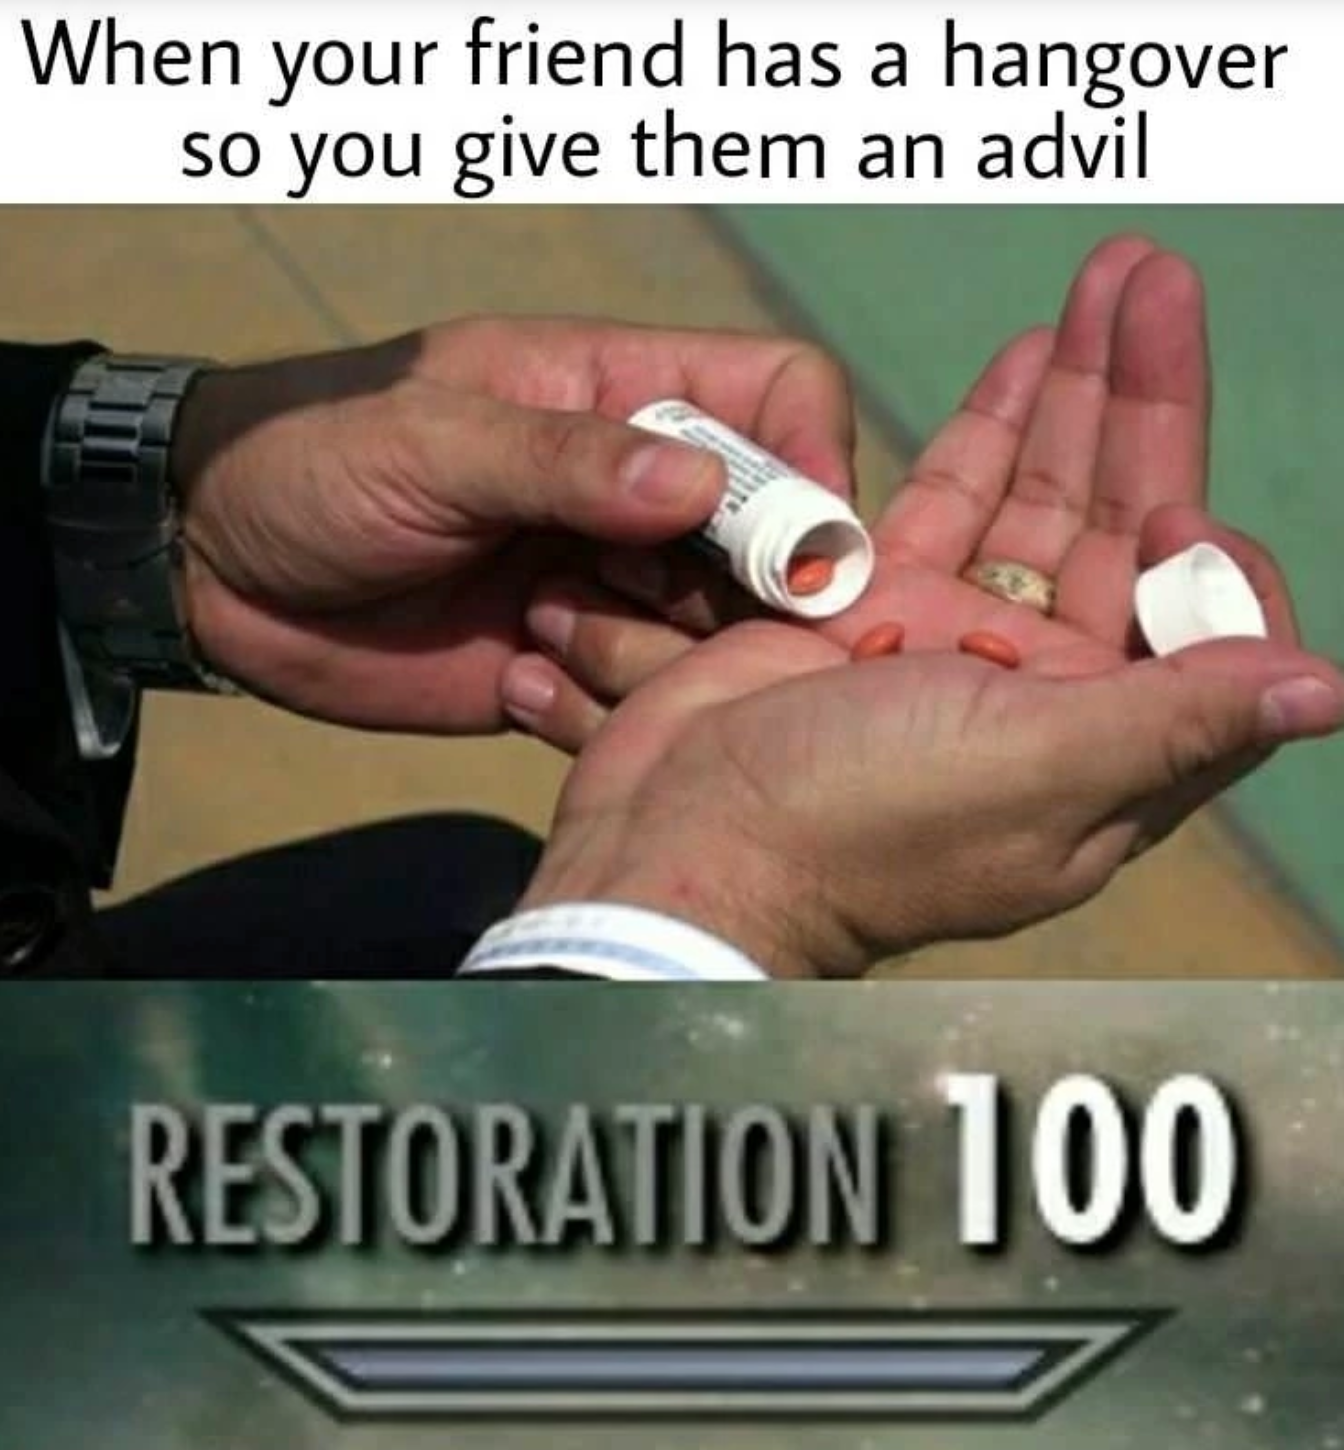 funny gaming memes - hand - When your friend has a hangover so you give them an advil Restoration 100